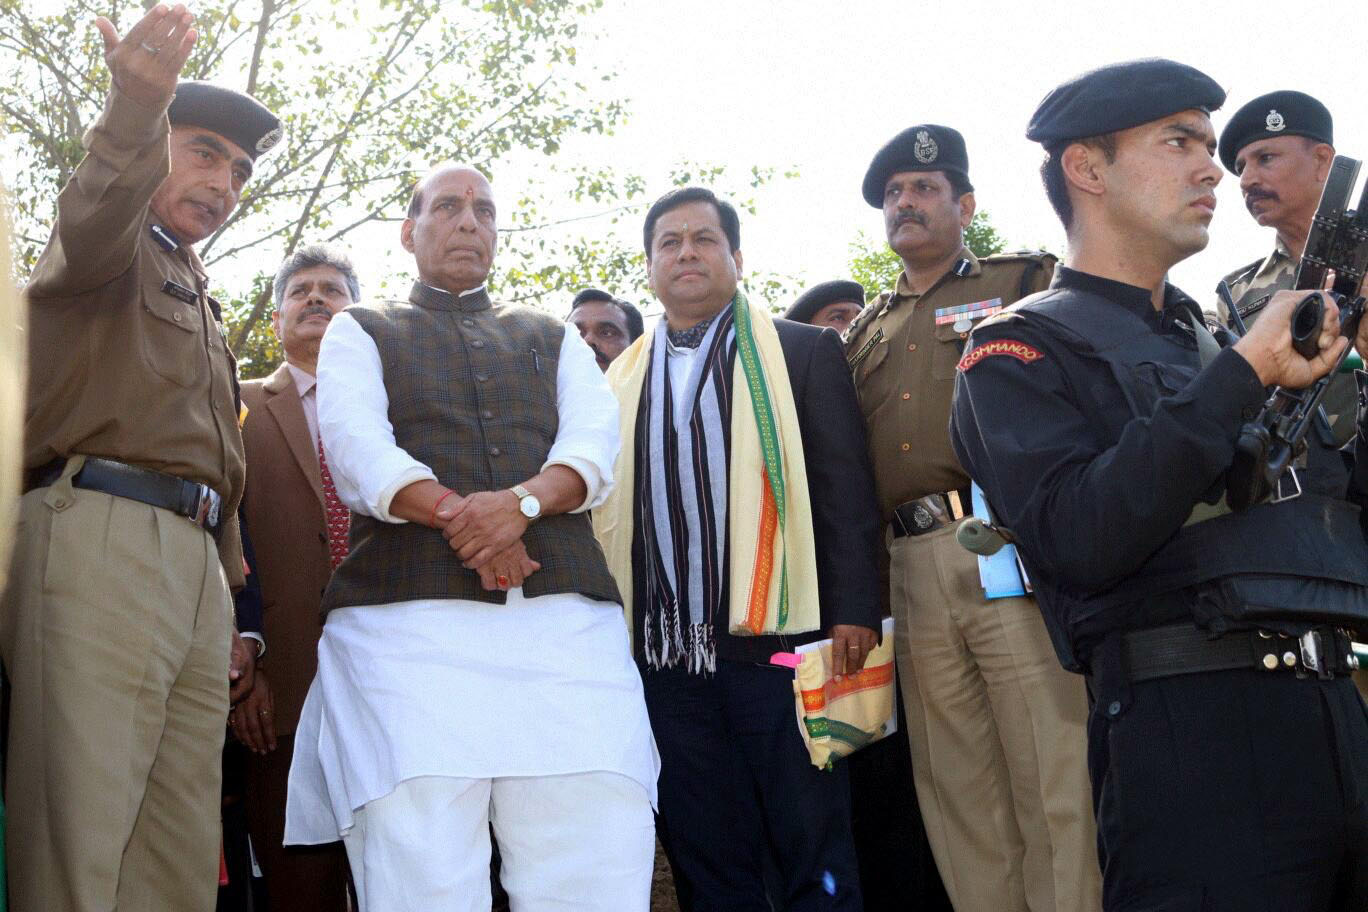 The Union Home Minister, Shri Rajnath Singh visits the Indo-Bangladesh border, in Assam on January 03, 2016. 	The Minister of State for Youth Affairs and Sports (Independent Charge), Shri Sarbananda Sonowal is also seen.